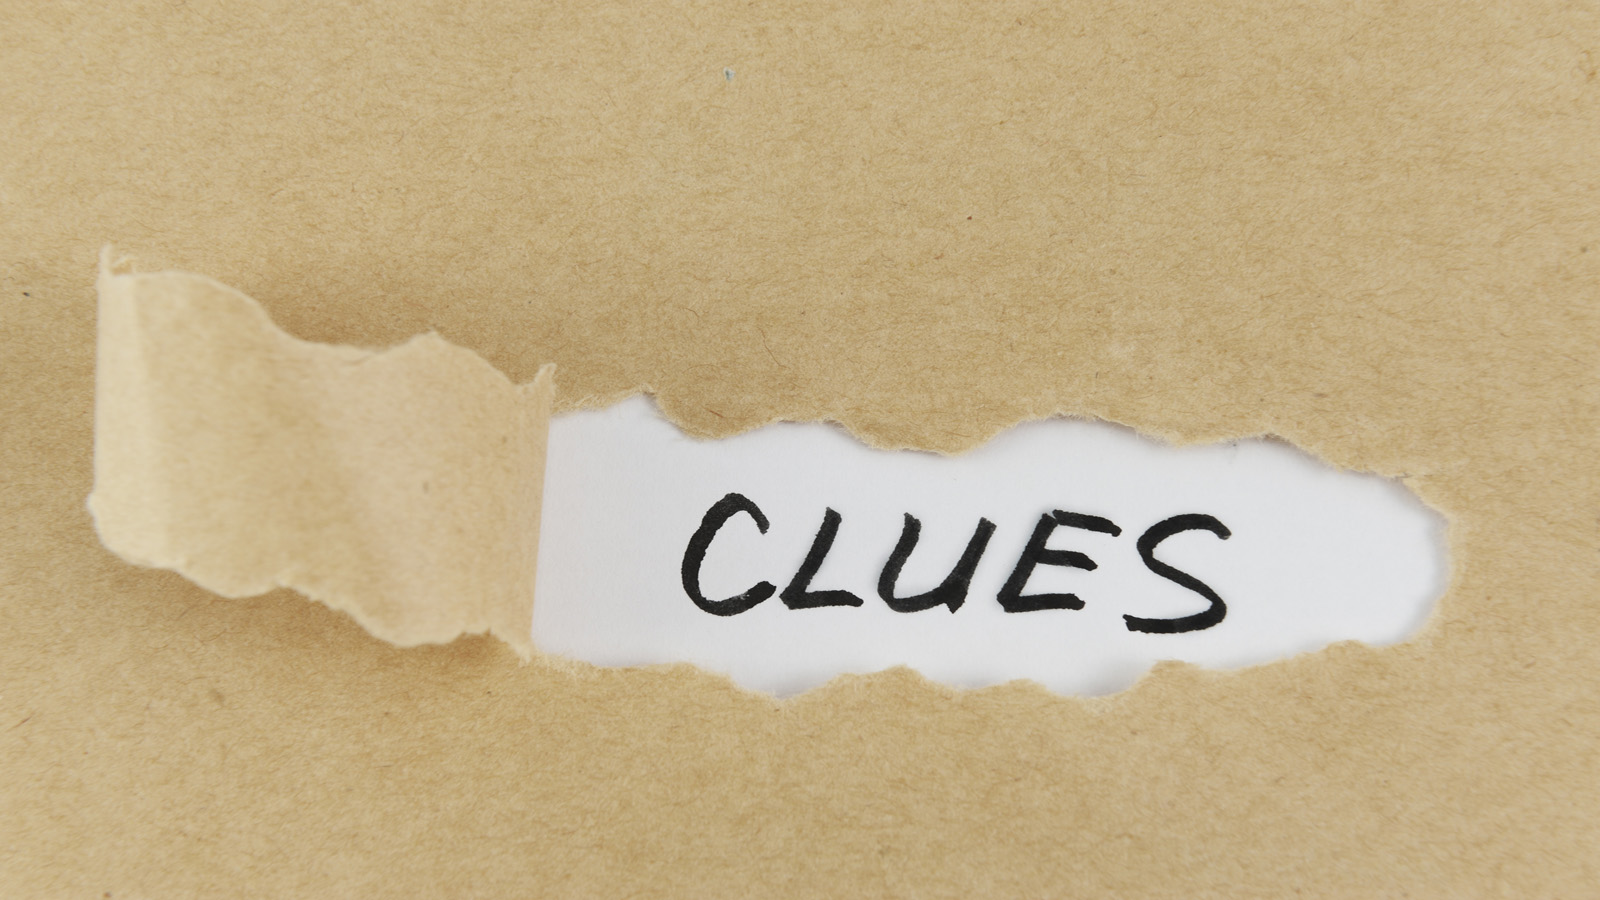 Every weekday during February, Research Matters will be releasing a video "clue" through its Virtual Scavenger Hunt website that in turn will take amateur sleuths to the website of one of Ontario's 21 universities.